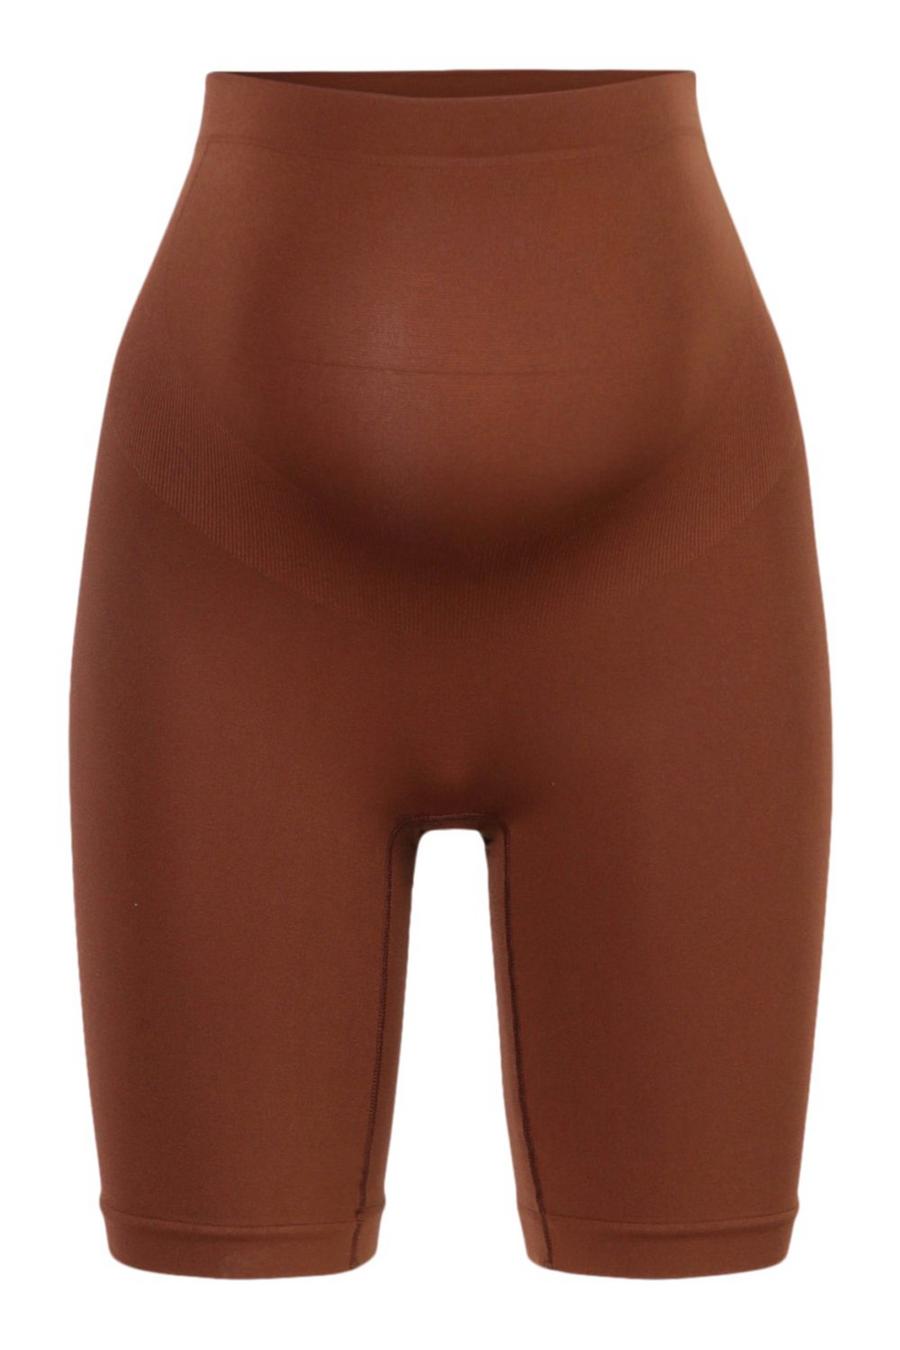 Chestnut brown Maternity Seamless Over The Bump Short image number 1